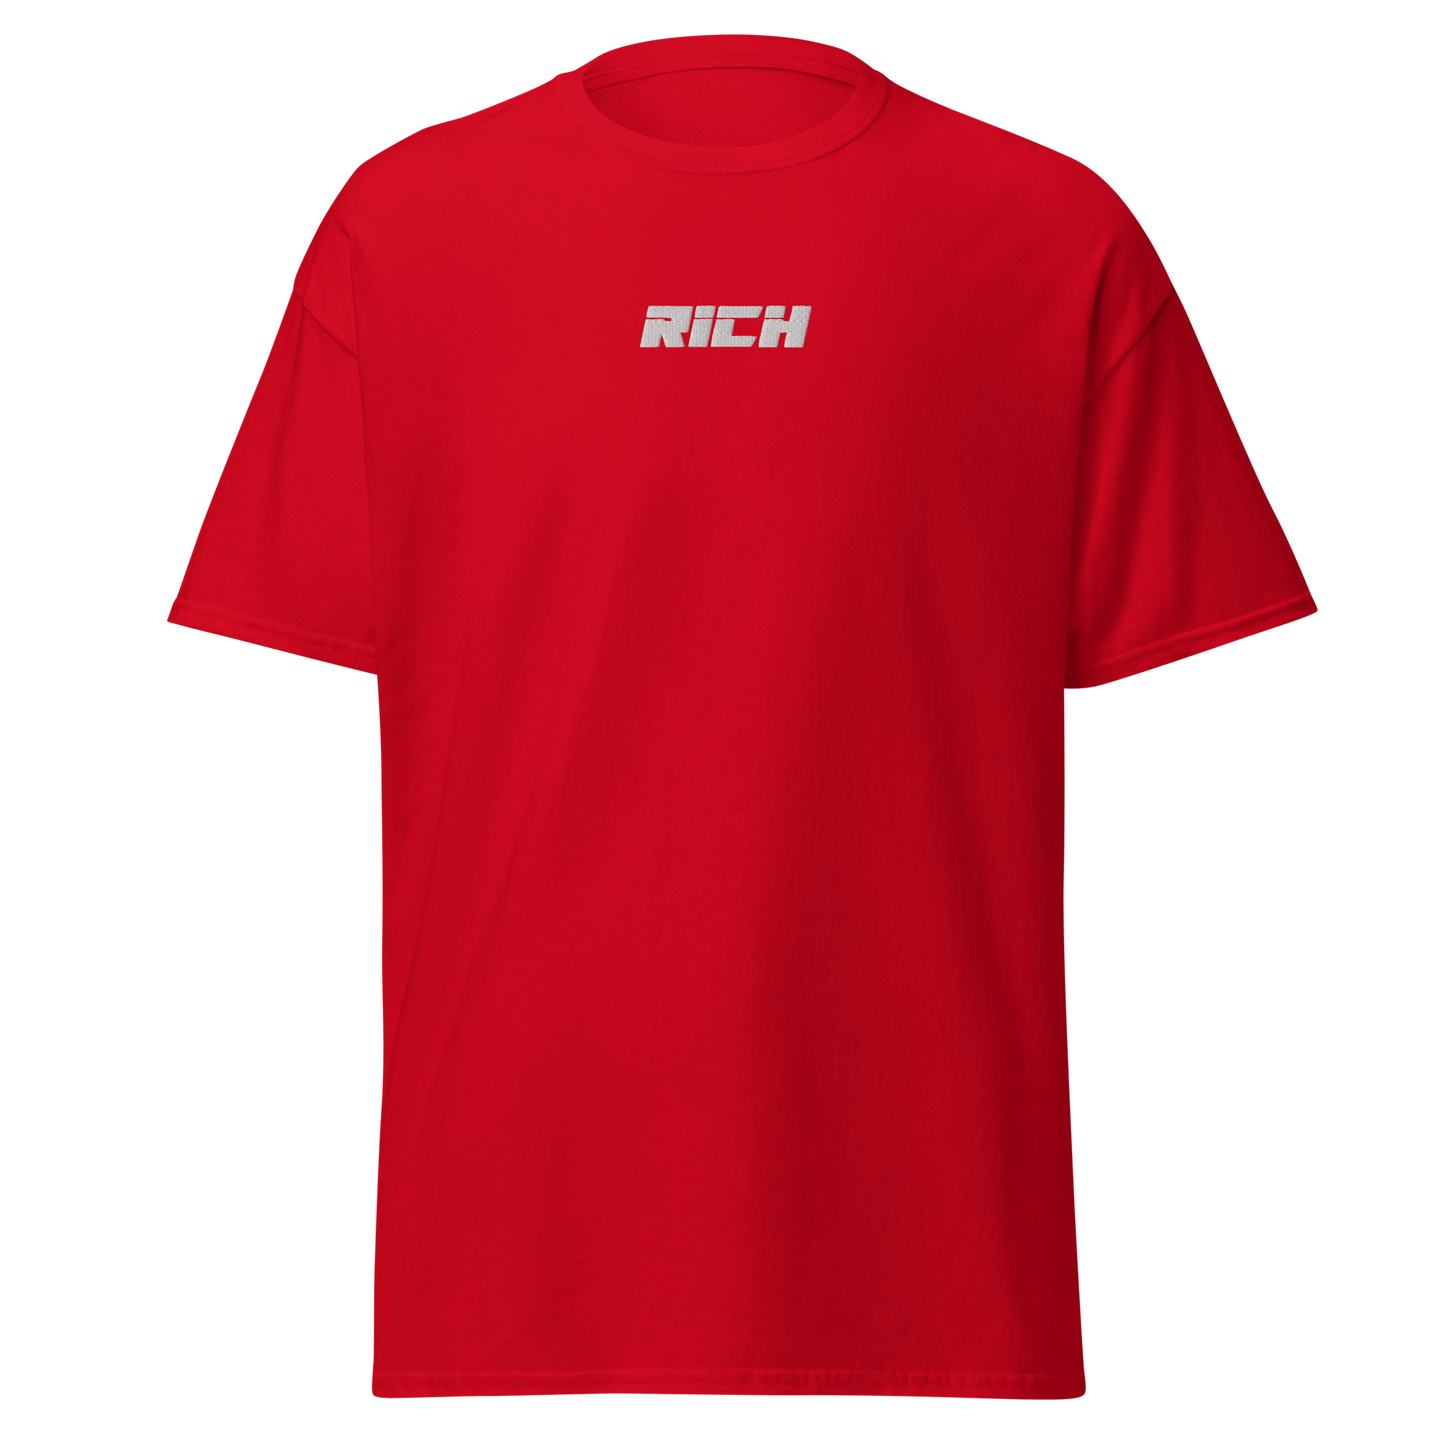 RICH Tee stitched